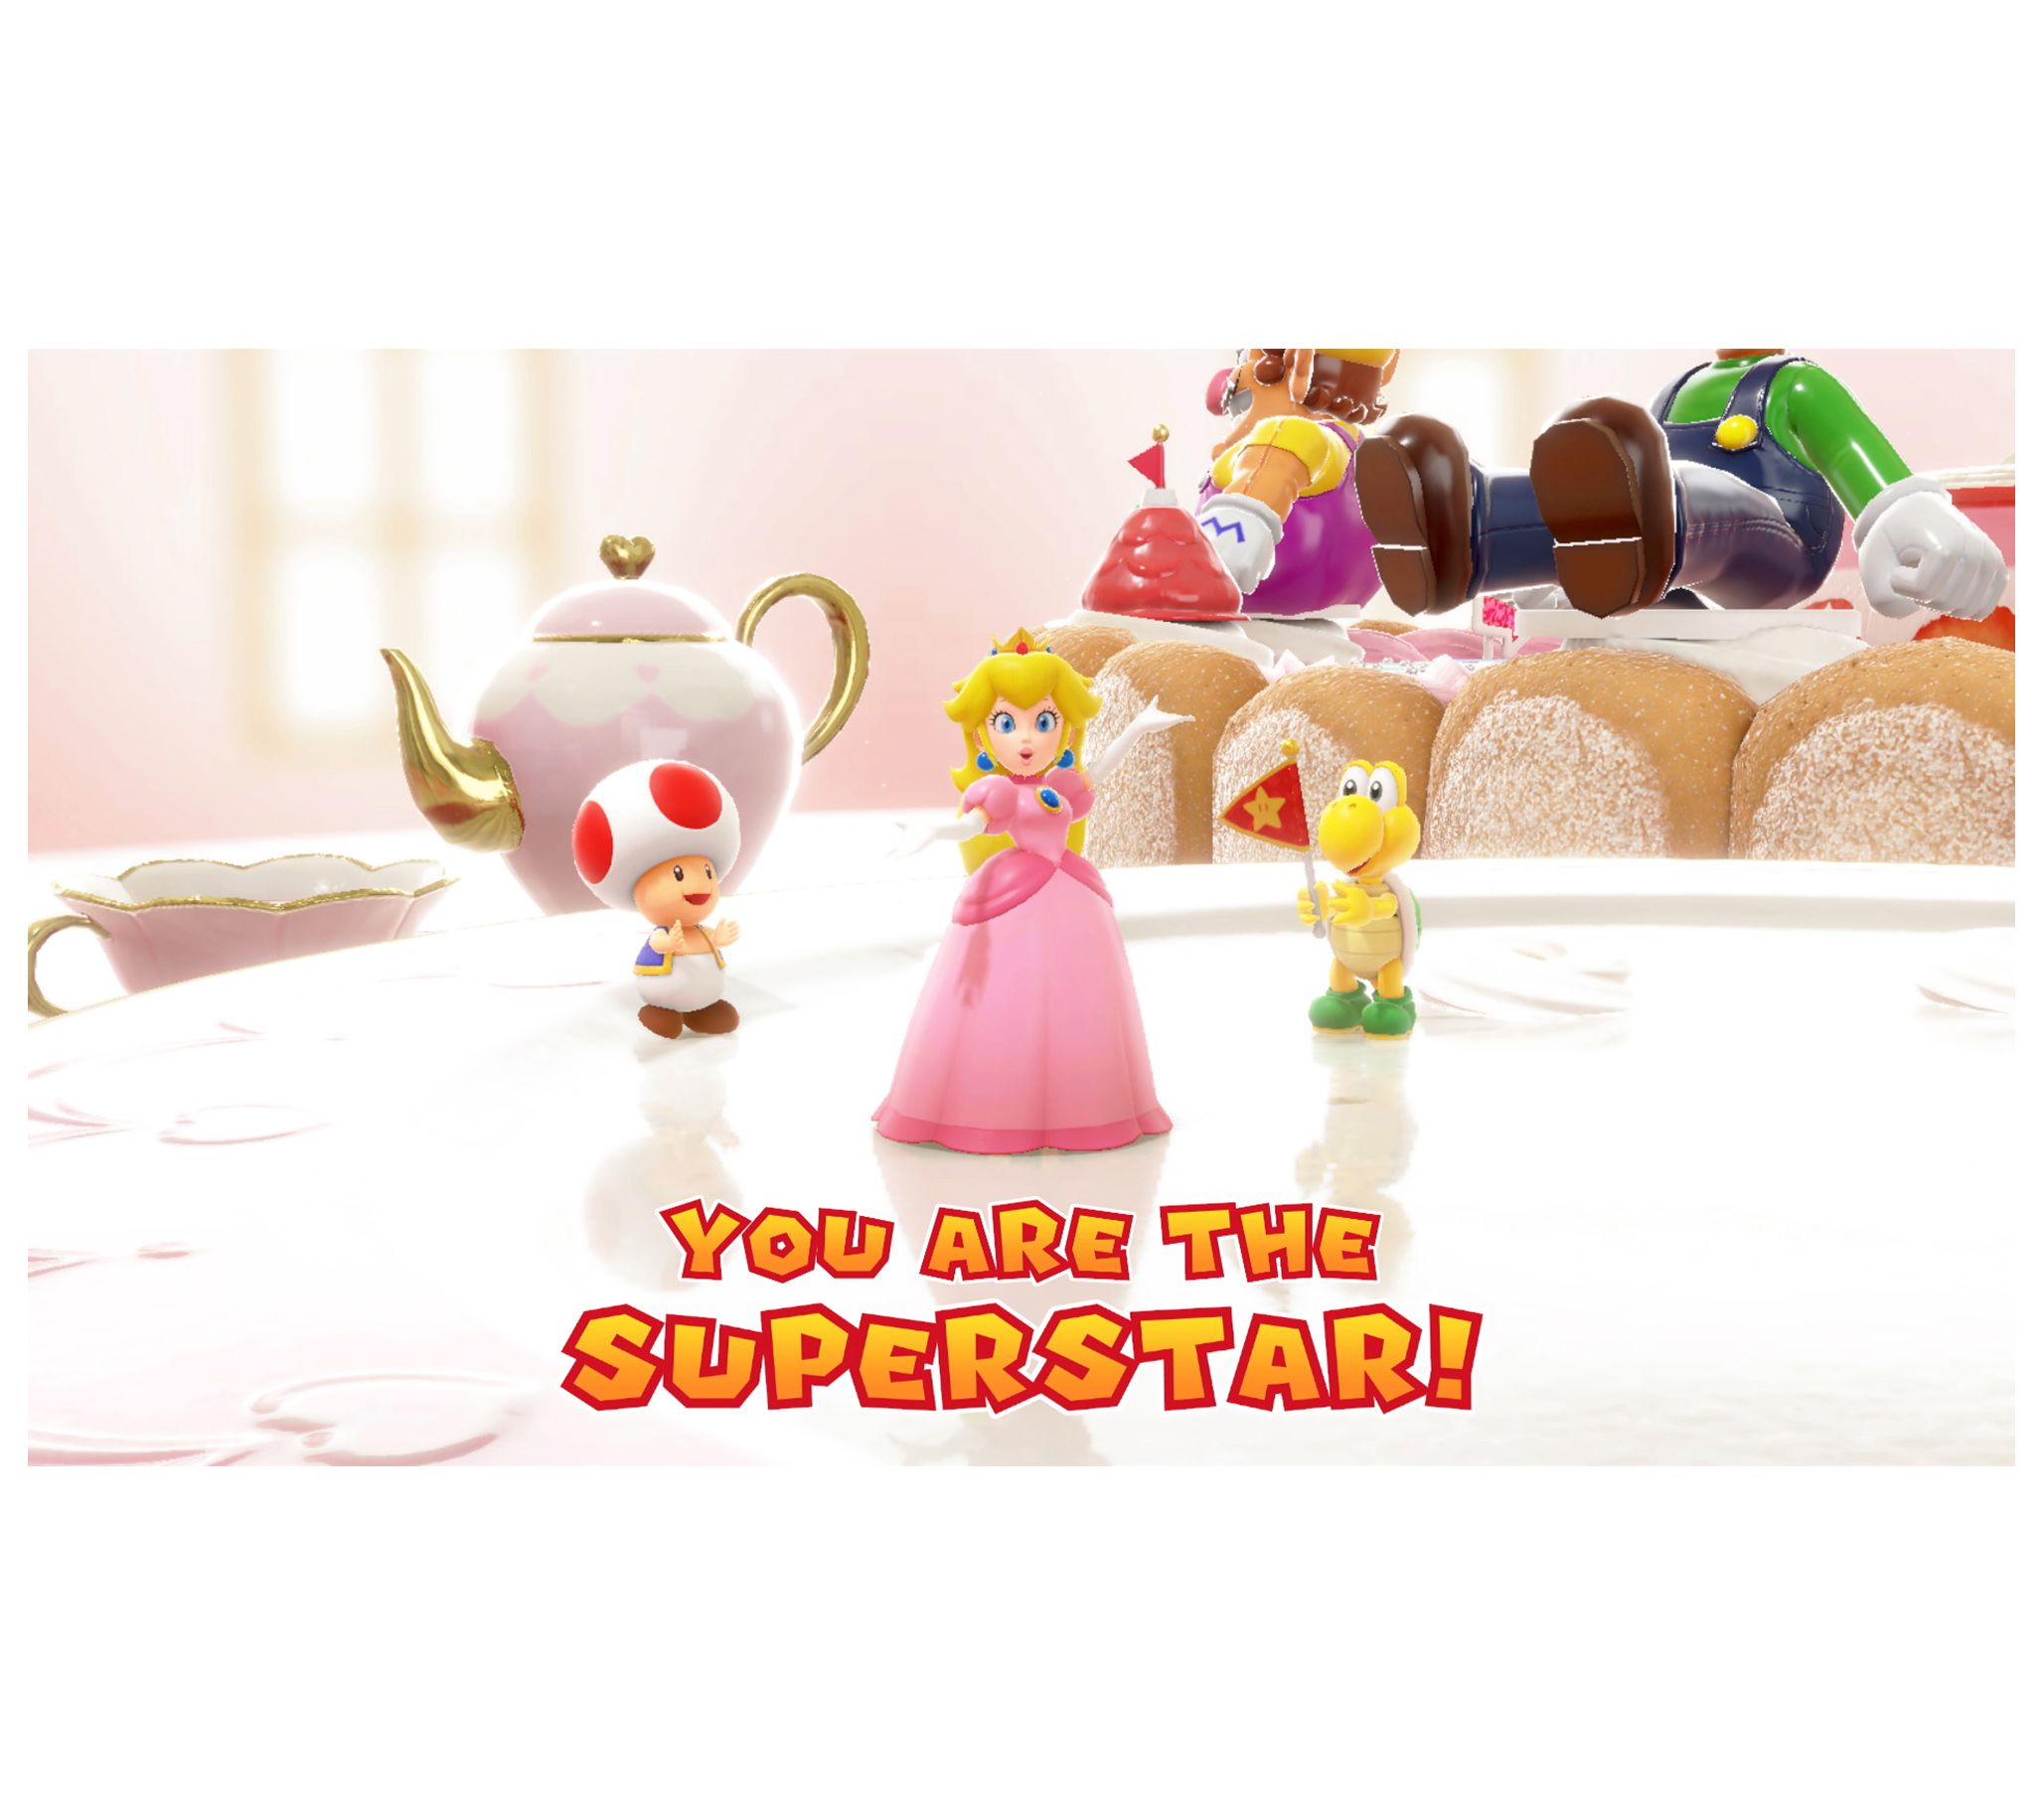 Mario Party Superstars' review: A return to form with one big pain